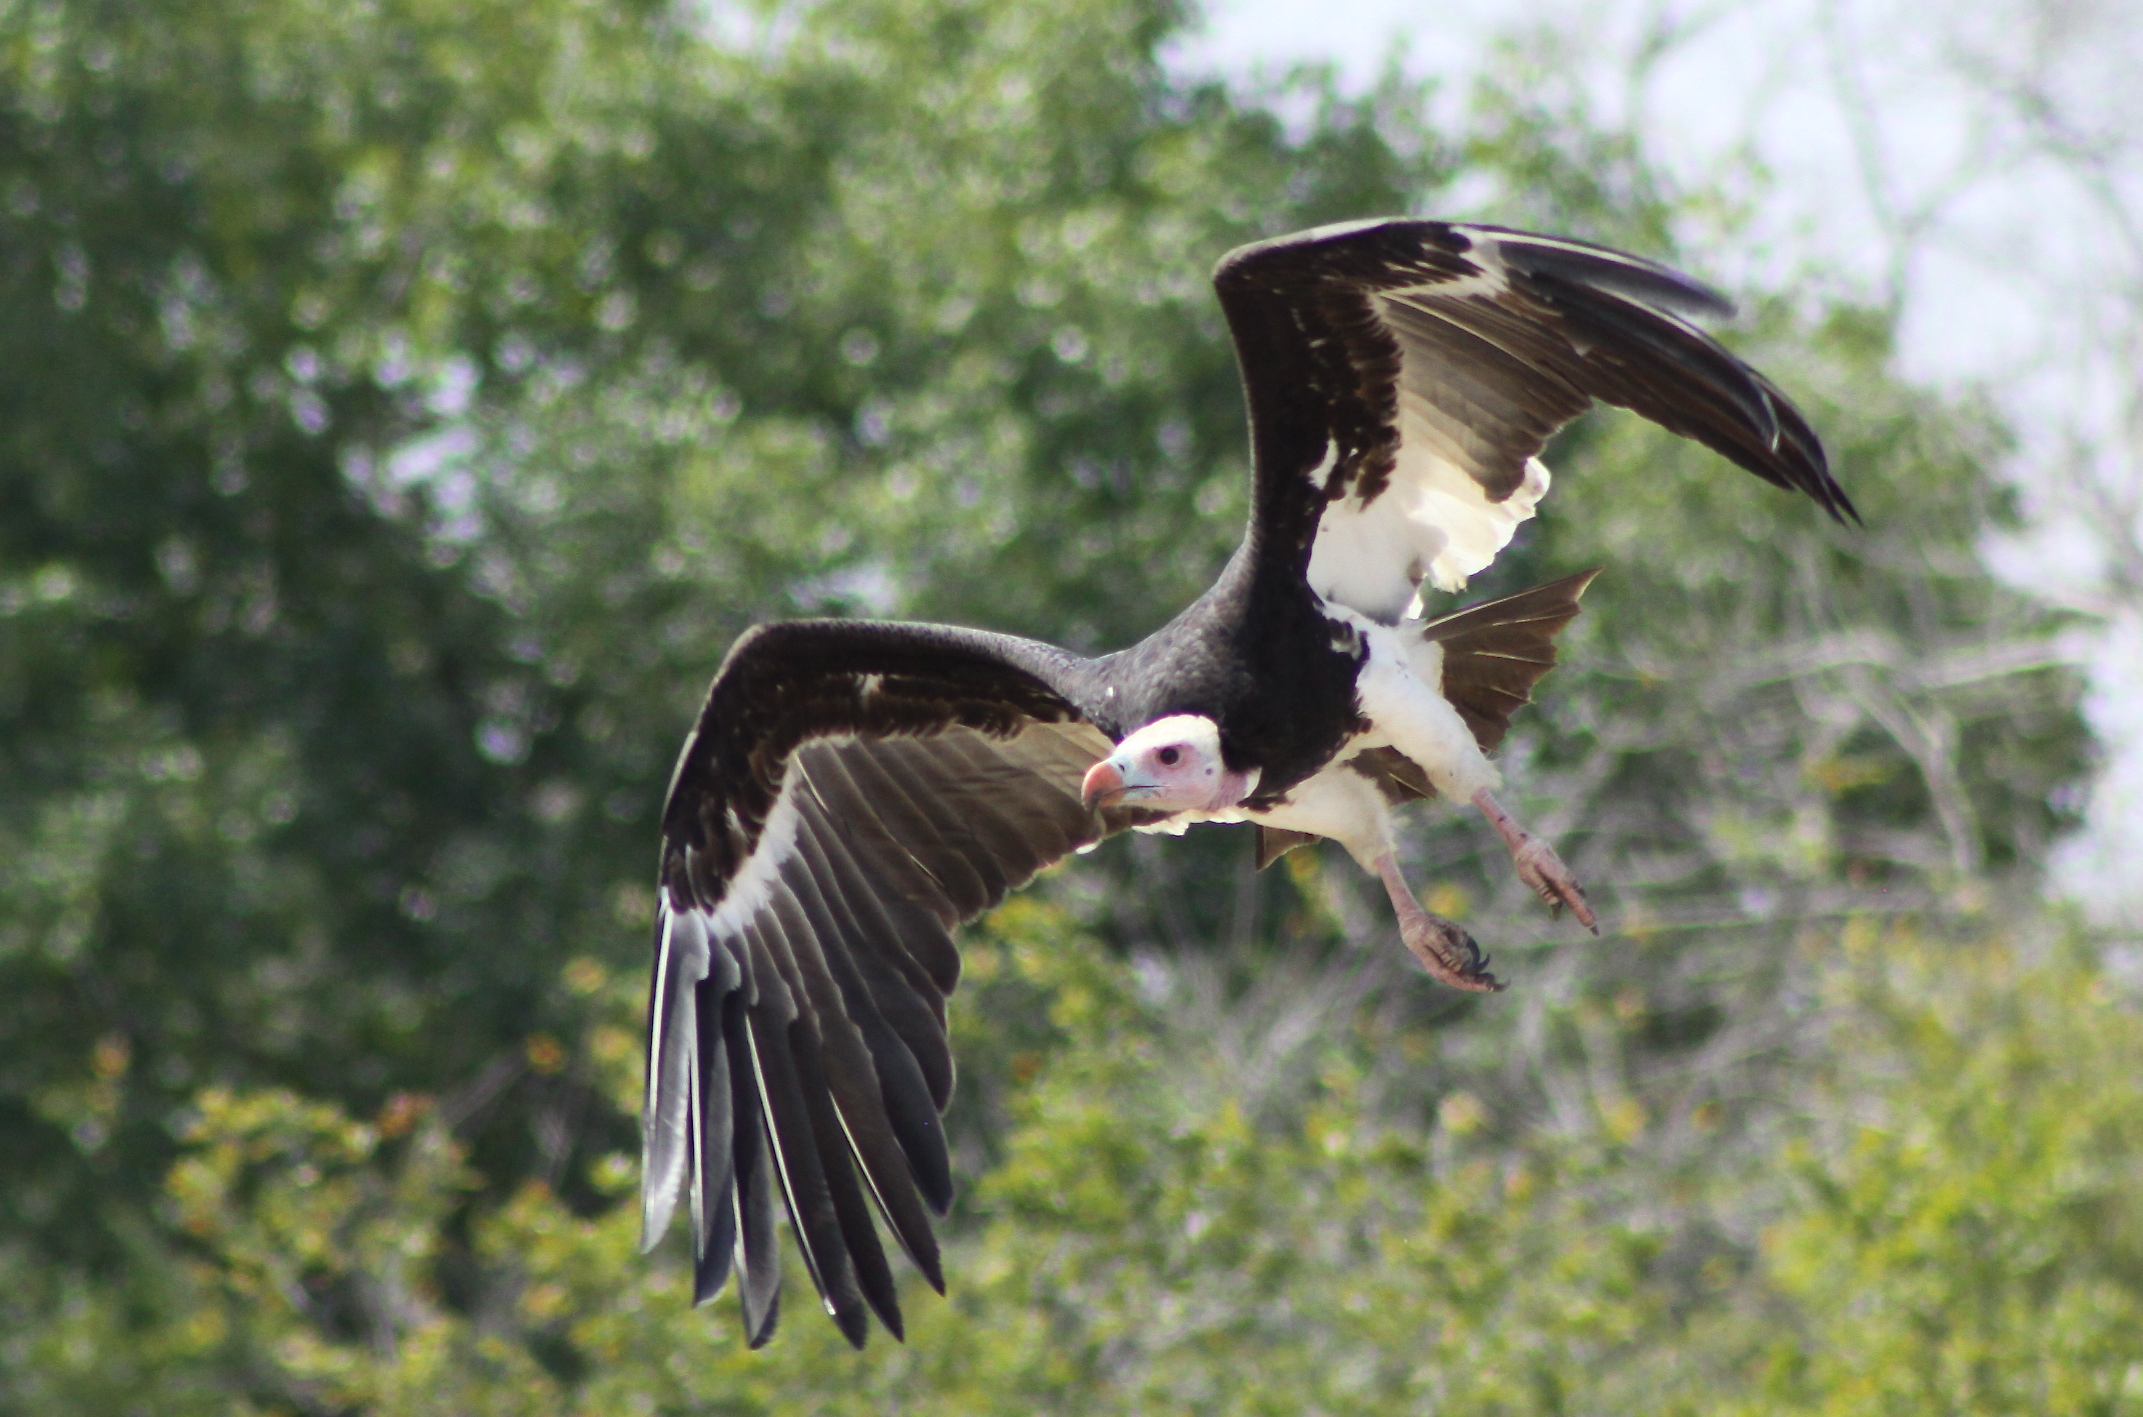 image shows large black and white vulture with a white head flying